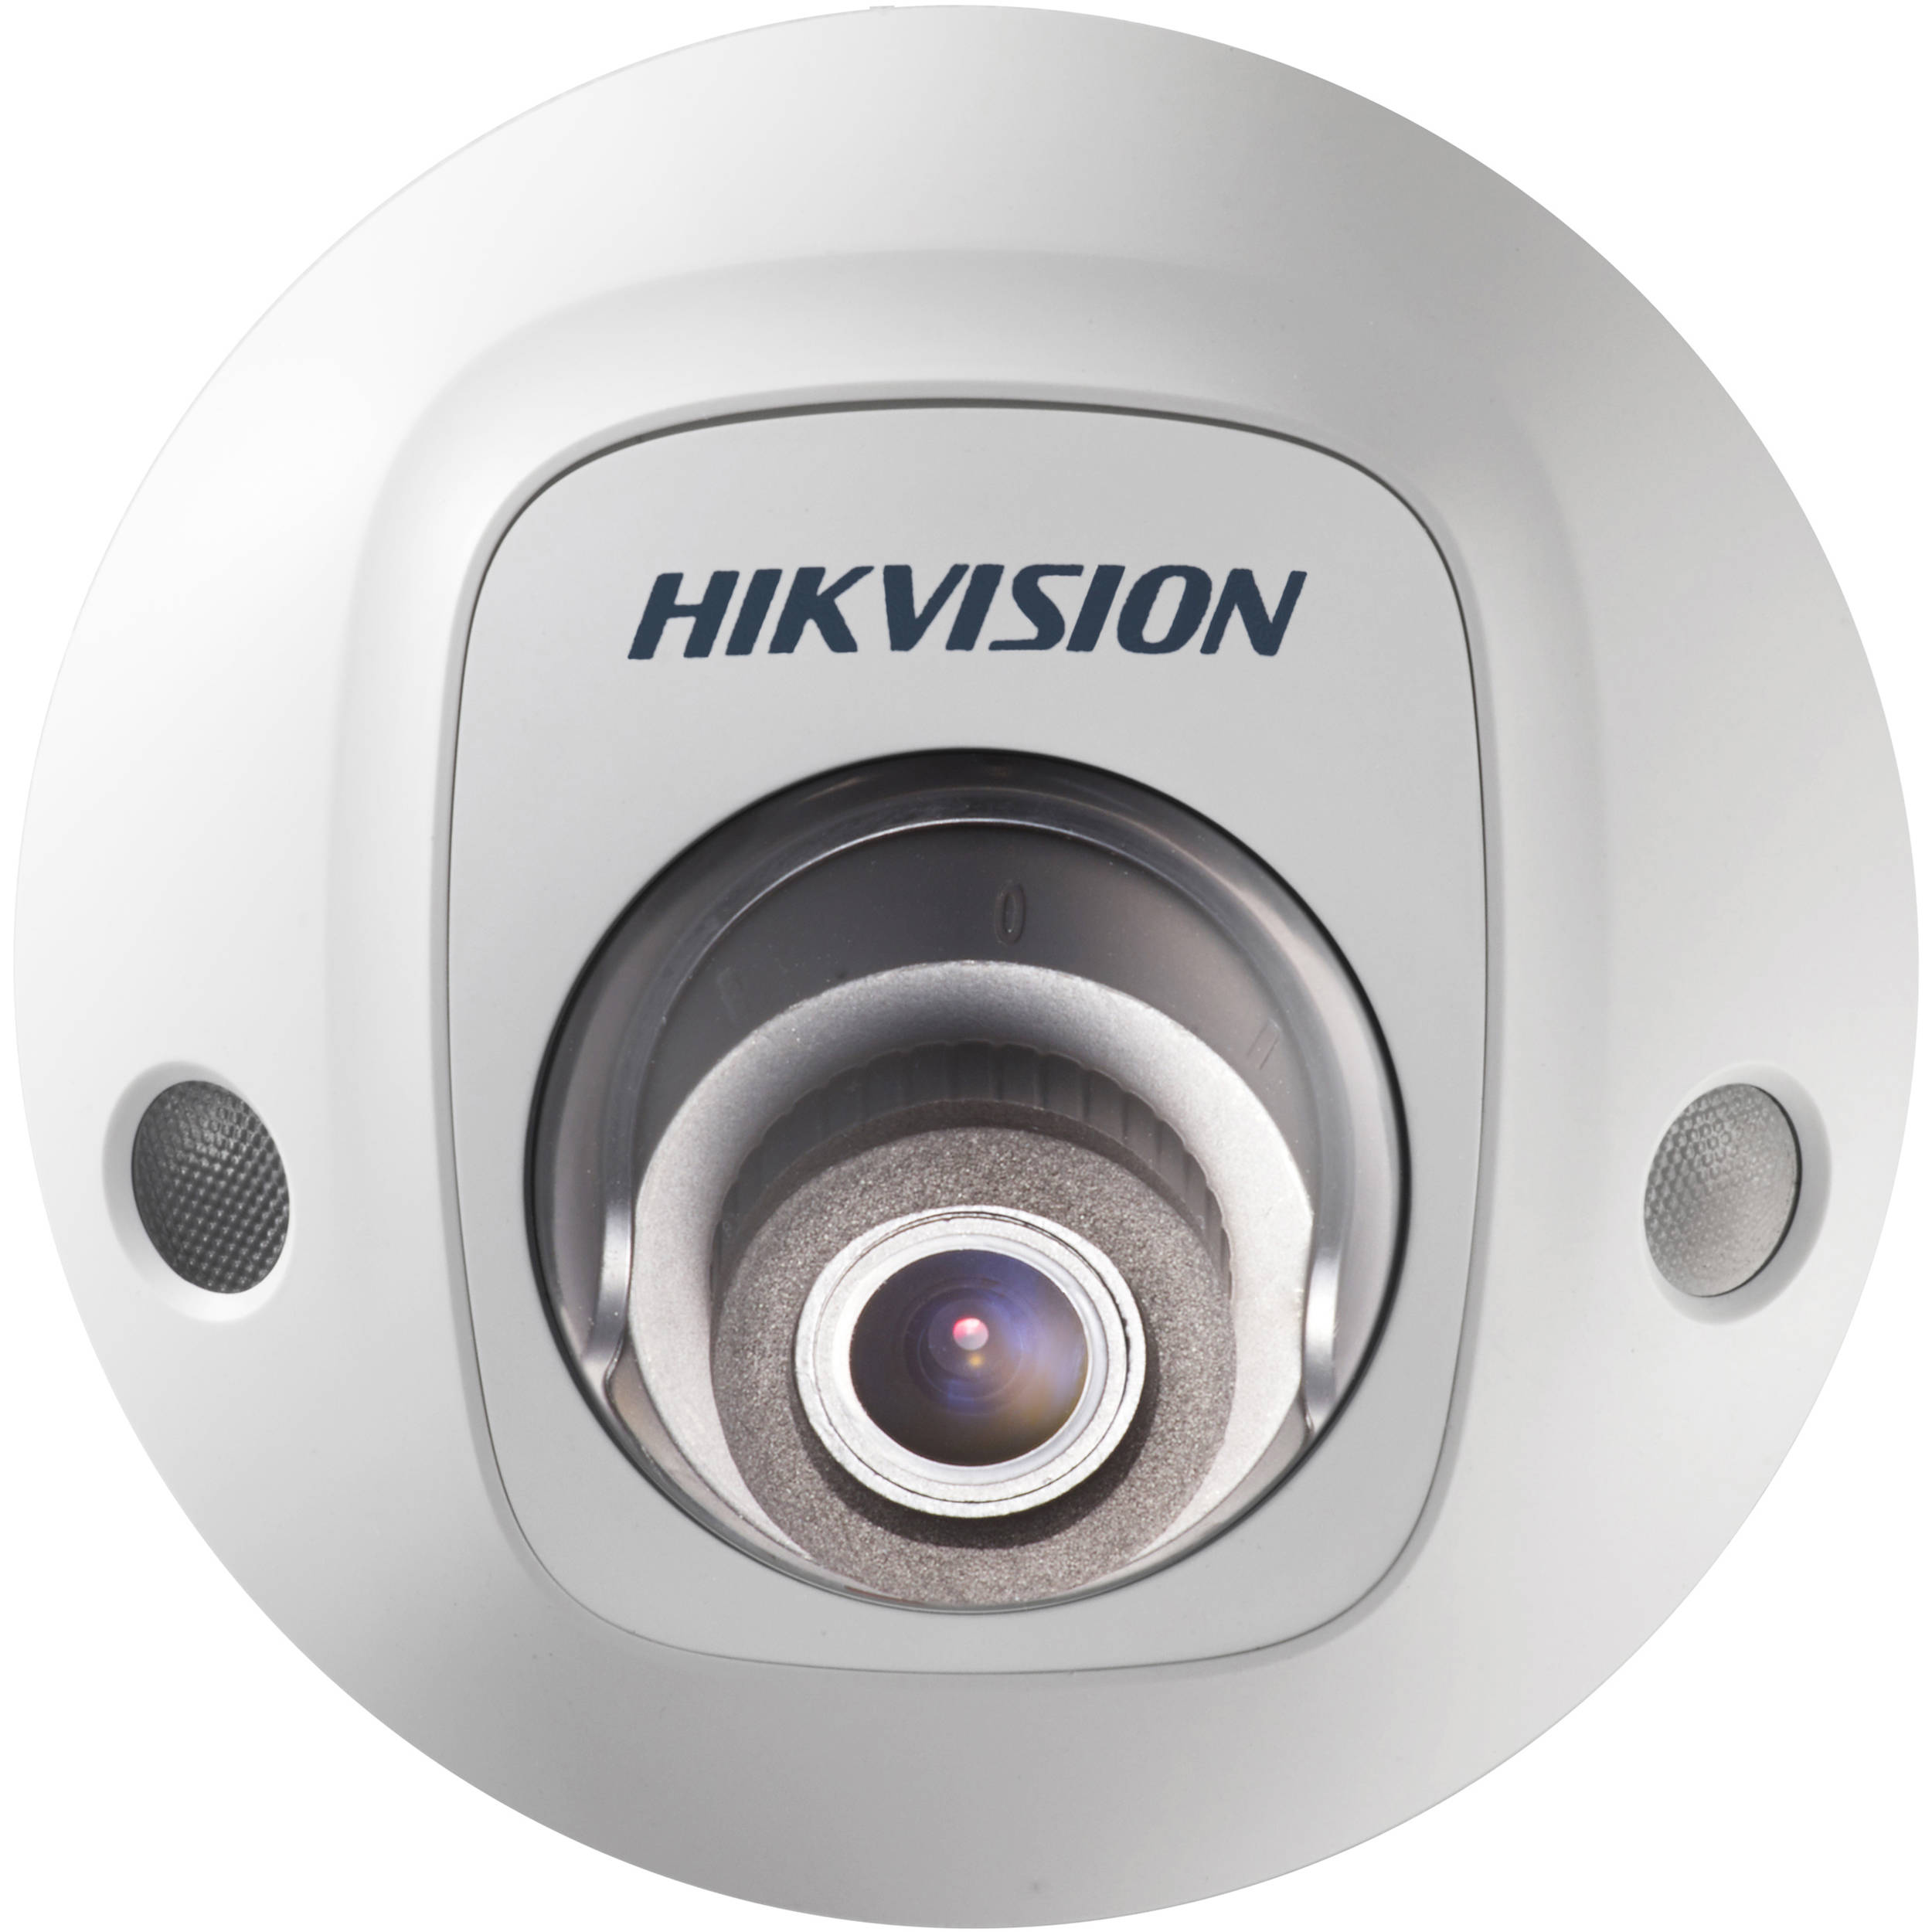 hikvision 2mp ip dome camera with audio